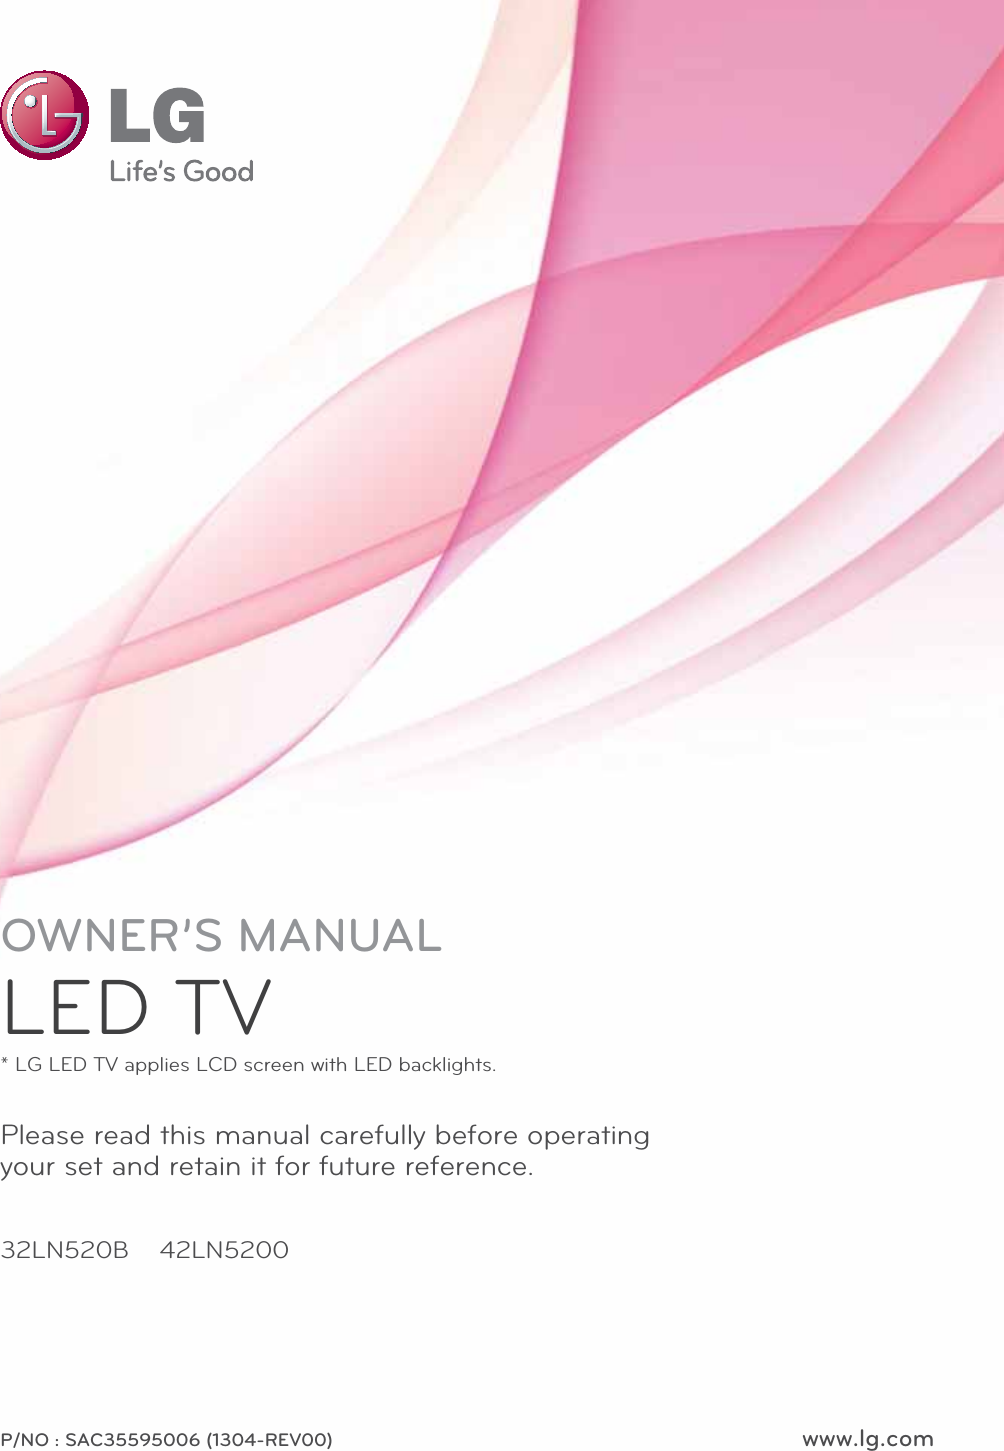 www.lg.comP/NO : SAC35595006 (1304-REV00)Please read this manual carefully before operating your set and retain it for future reference.OWNER’S MANUALLED TV* LG LED TV applies LCD screen with LED backlights.32LN520B 42LN5200